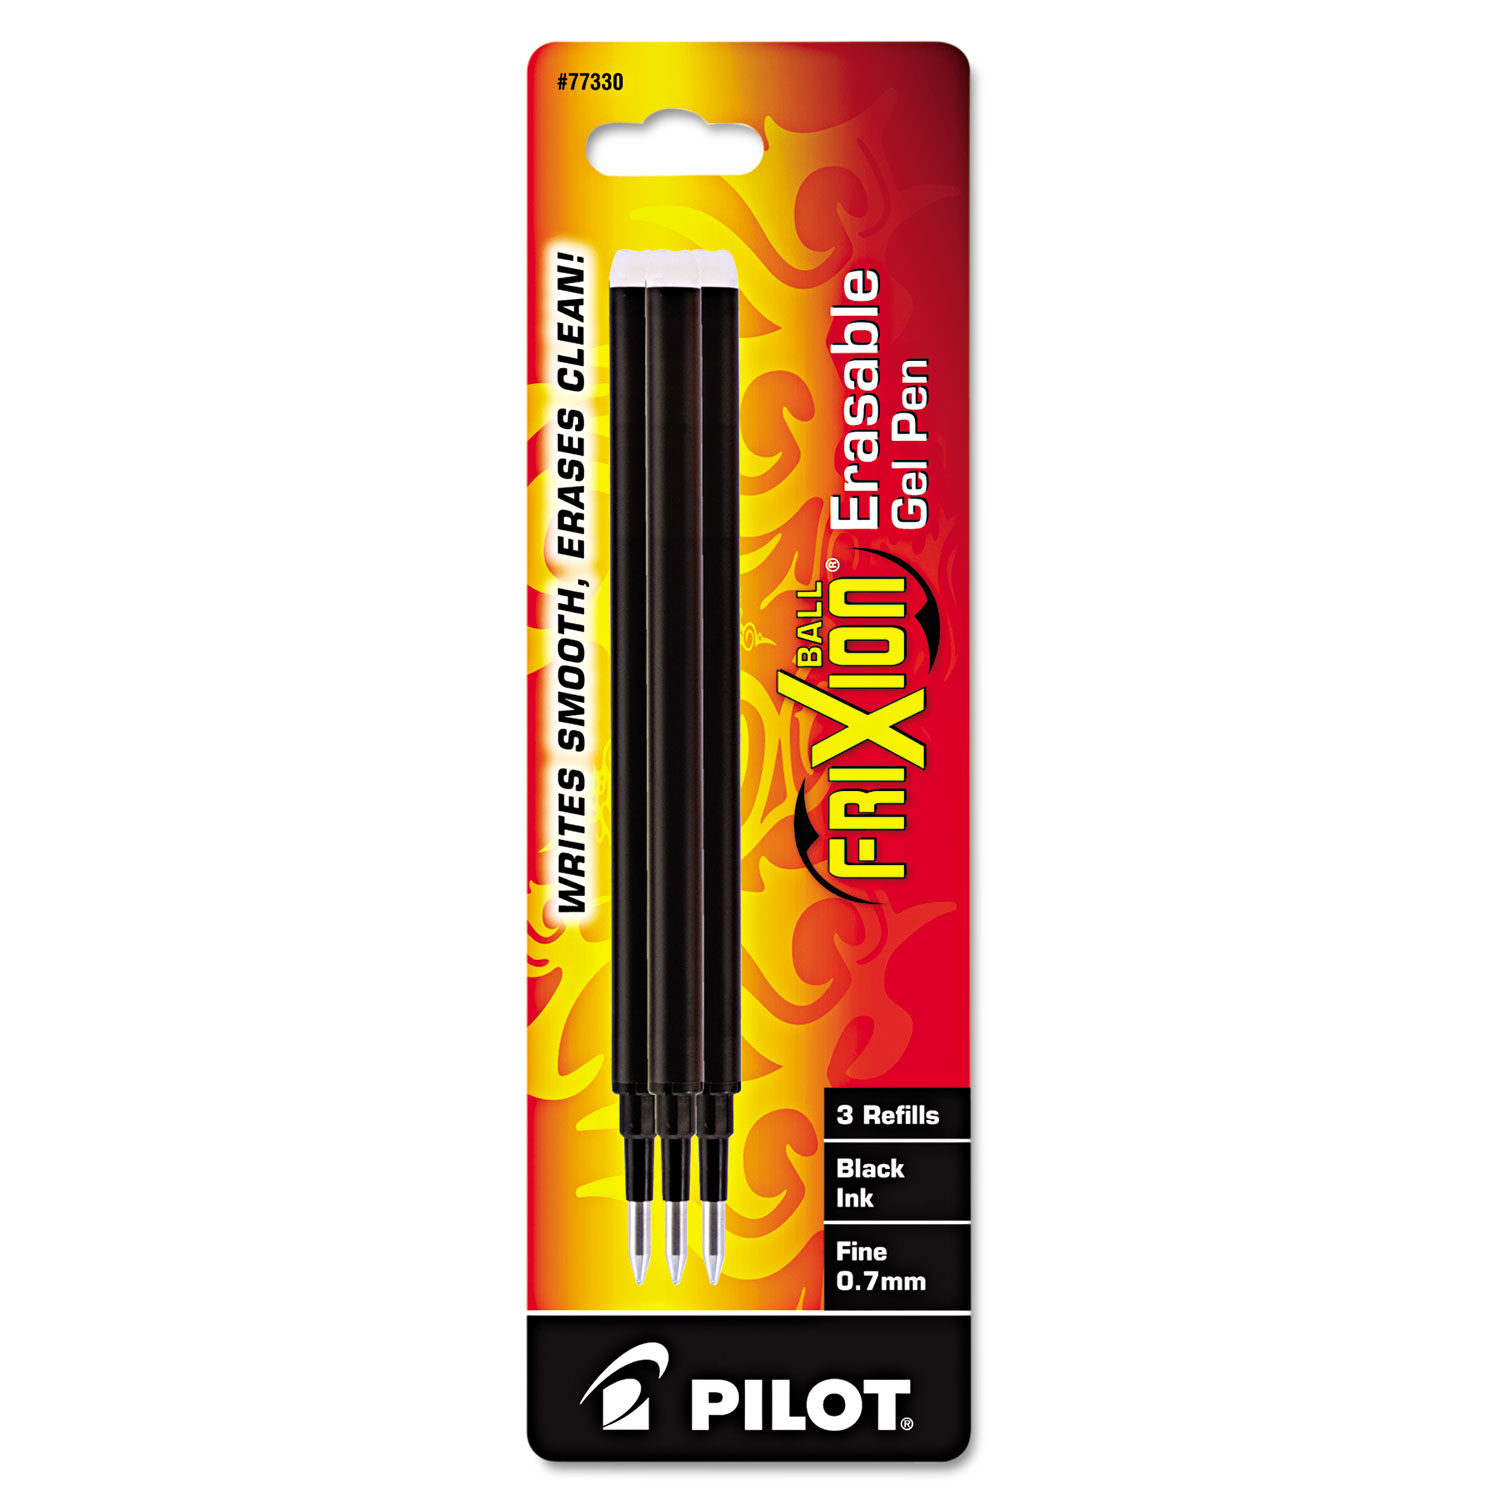 Refill for Pilot FriXion Erasable, FriXion Ball, FriXion Clicker and FriXion LX Gel Ink Pens, Fine Point, Black Ink, 3/Pack